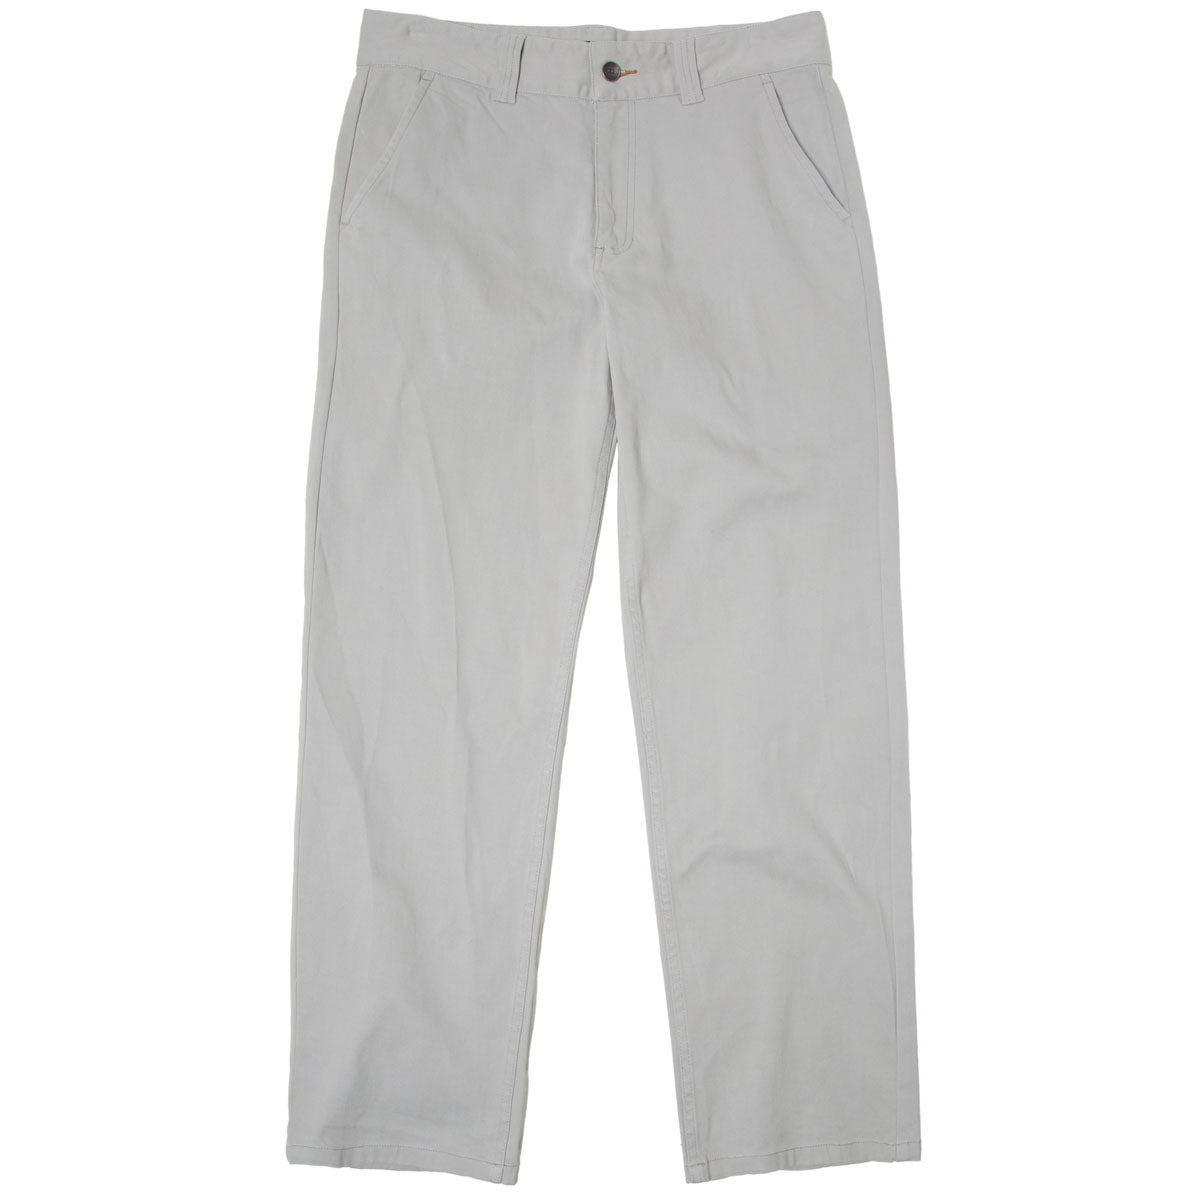 CCS Standard Plus Relaxed Chino Pants - Dove Grey image 5